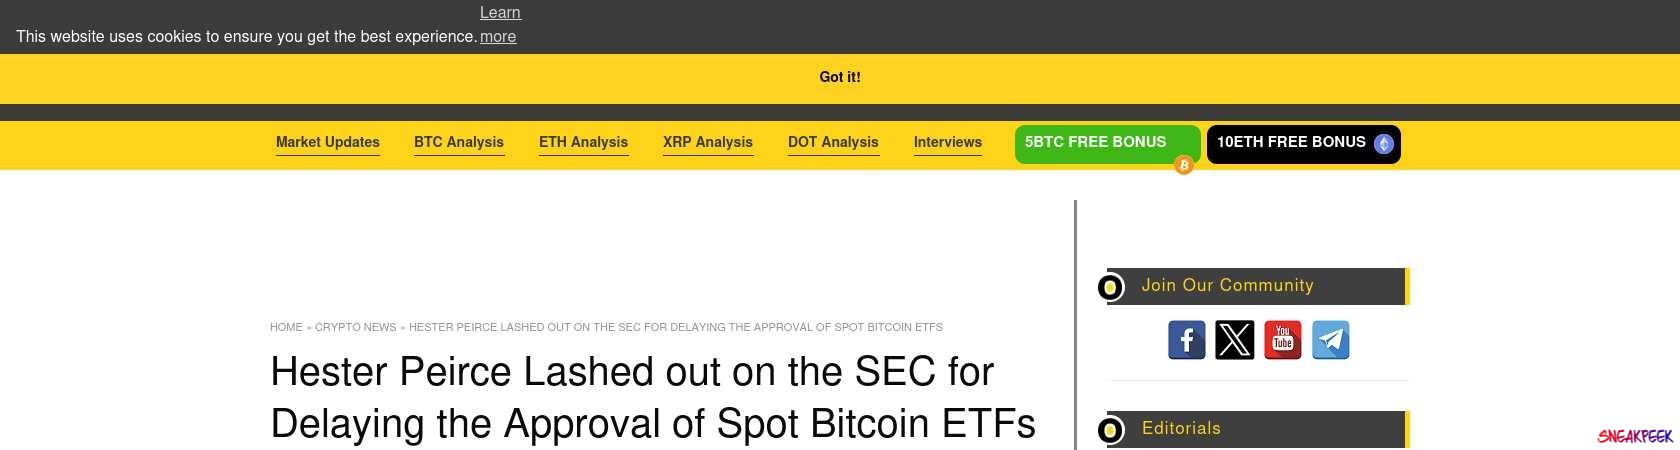 Read the full Article:  ⭲ Hester Peirce Lashed out on the SEC for Delaying the Approval of Spot Bitcoin ETFs